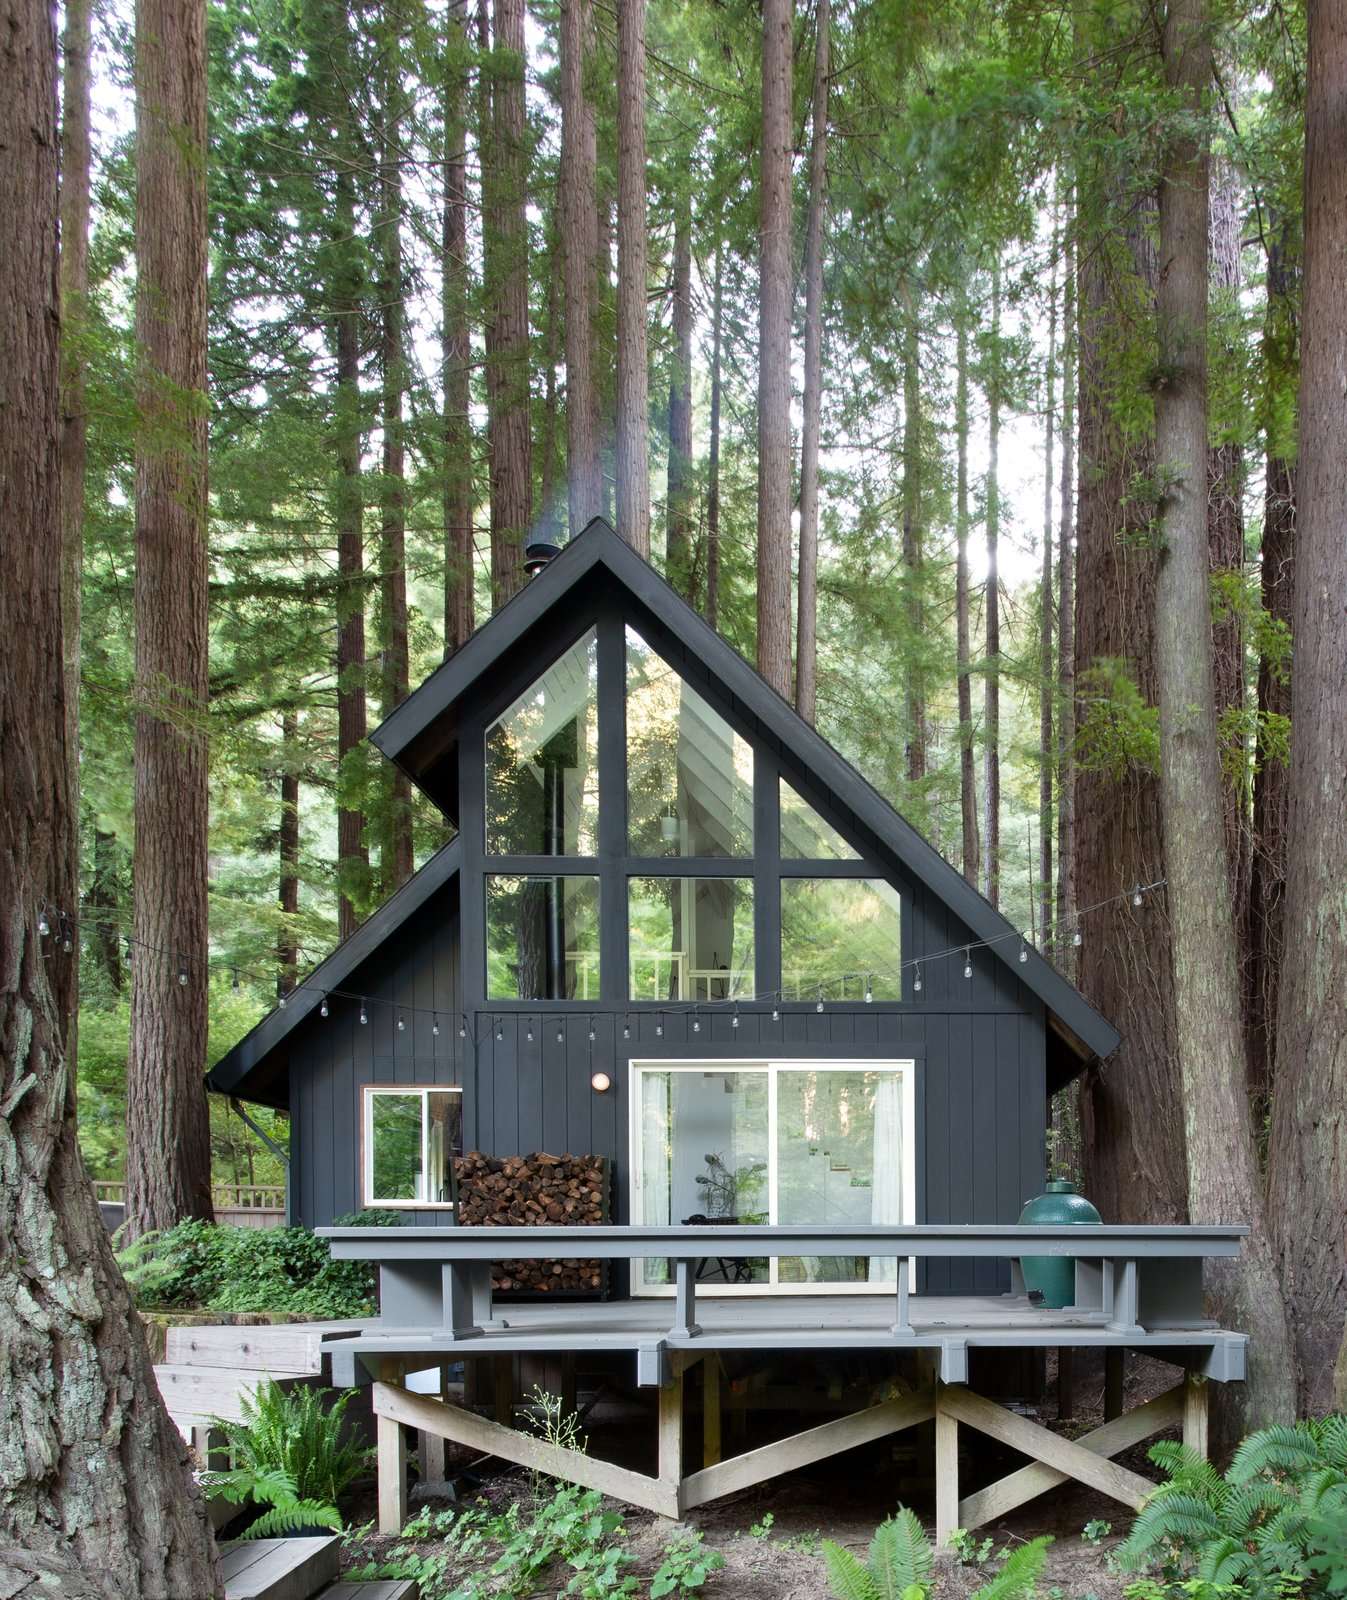 The 1,088-square-foot A-frame is located about an hour-and-a-half drive north of San Francisco in Western Sonoma County’s Cazadero township.